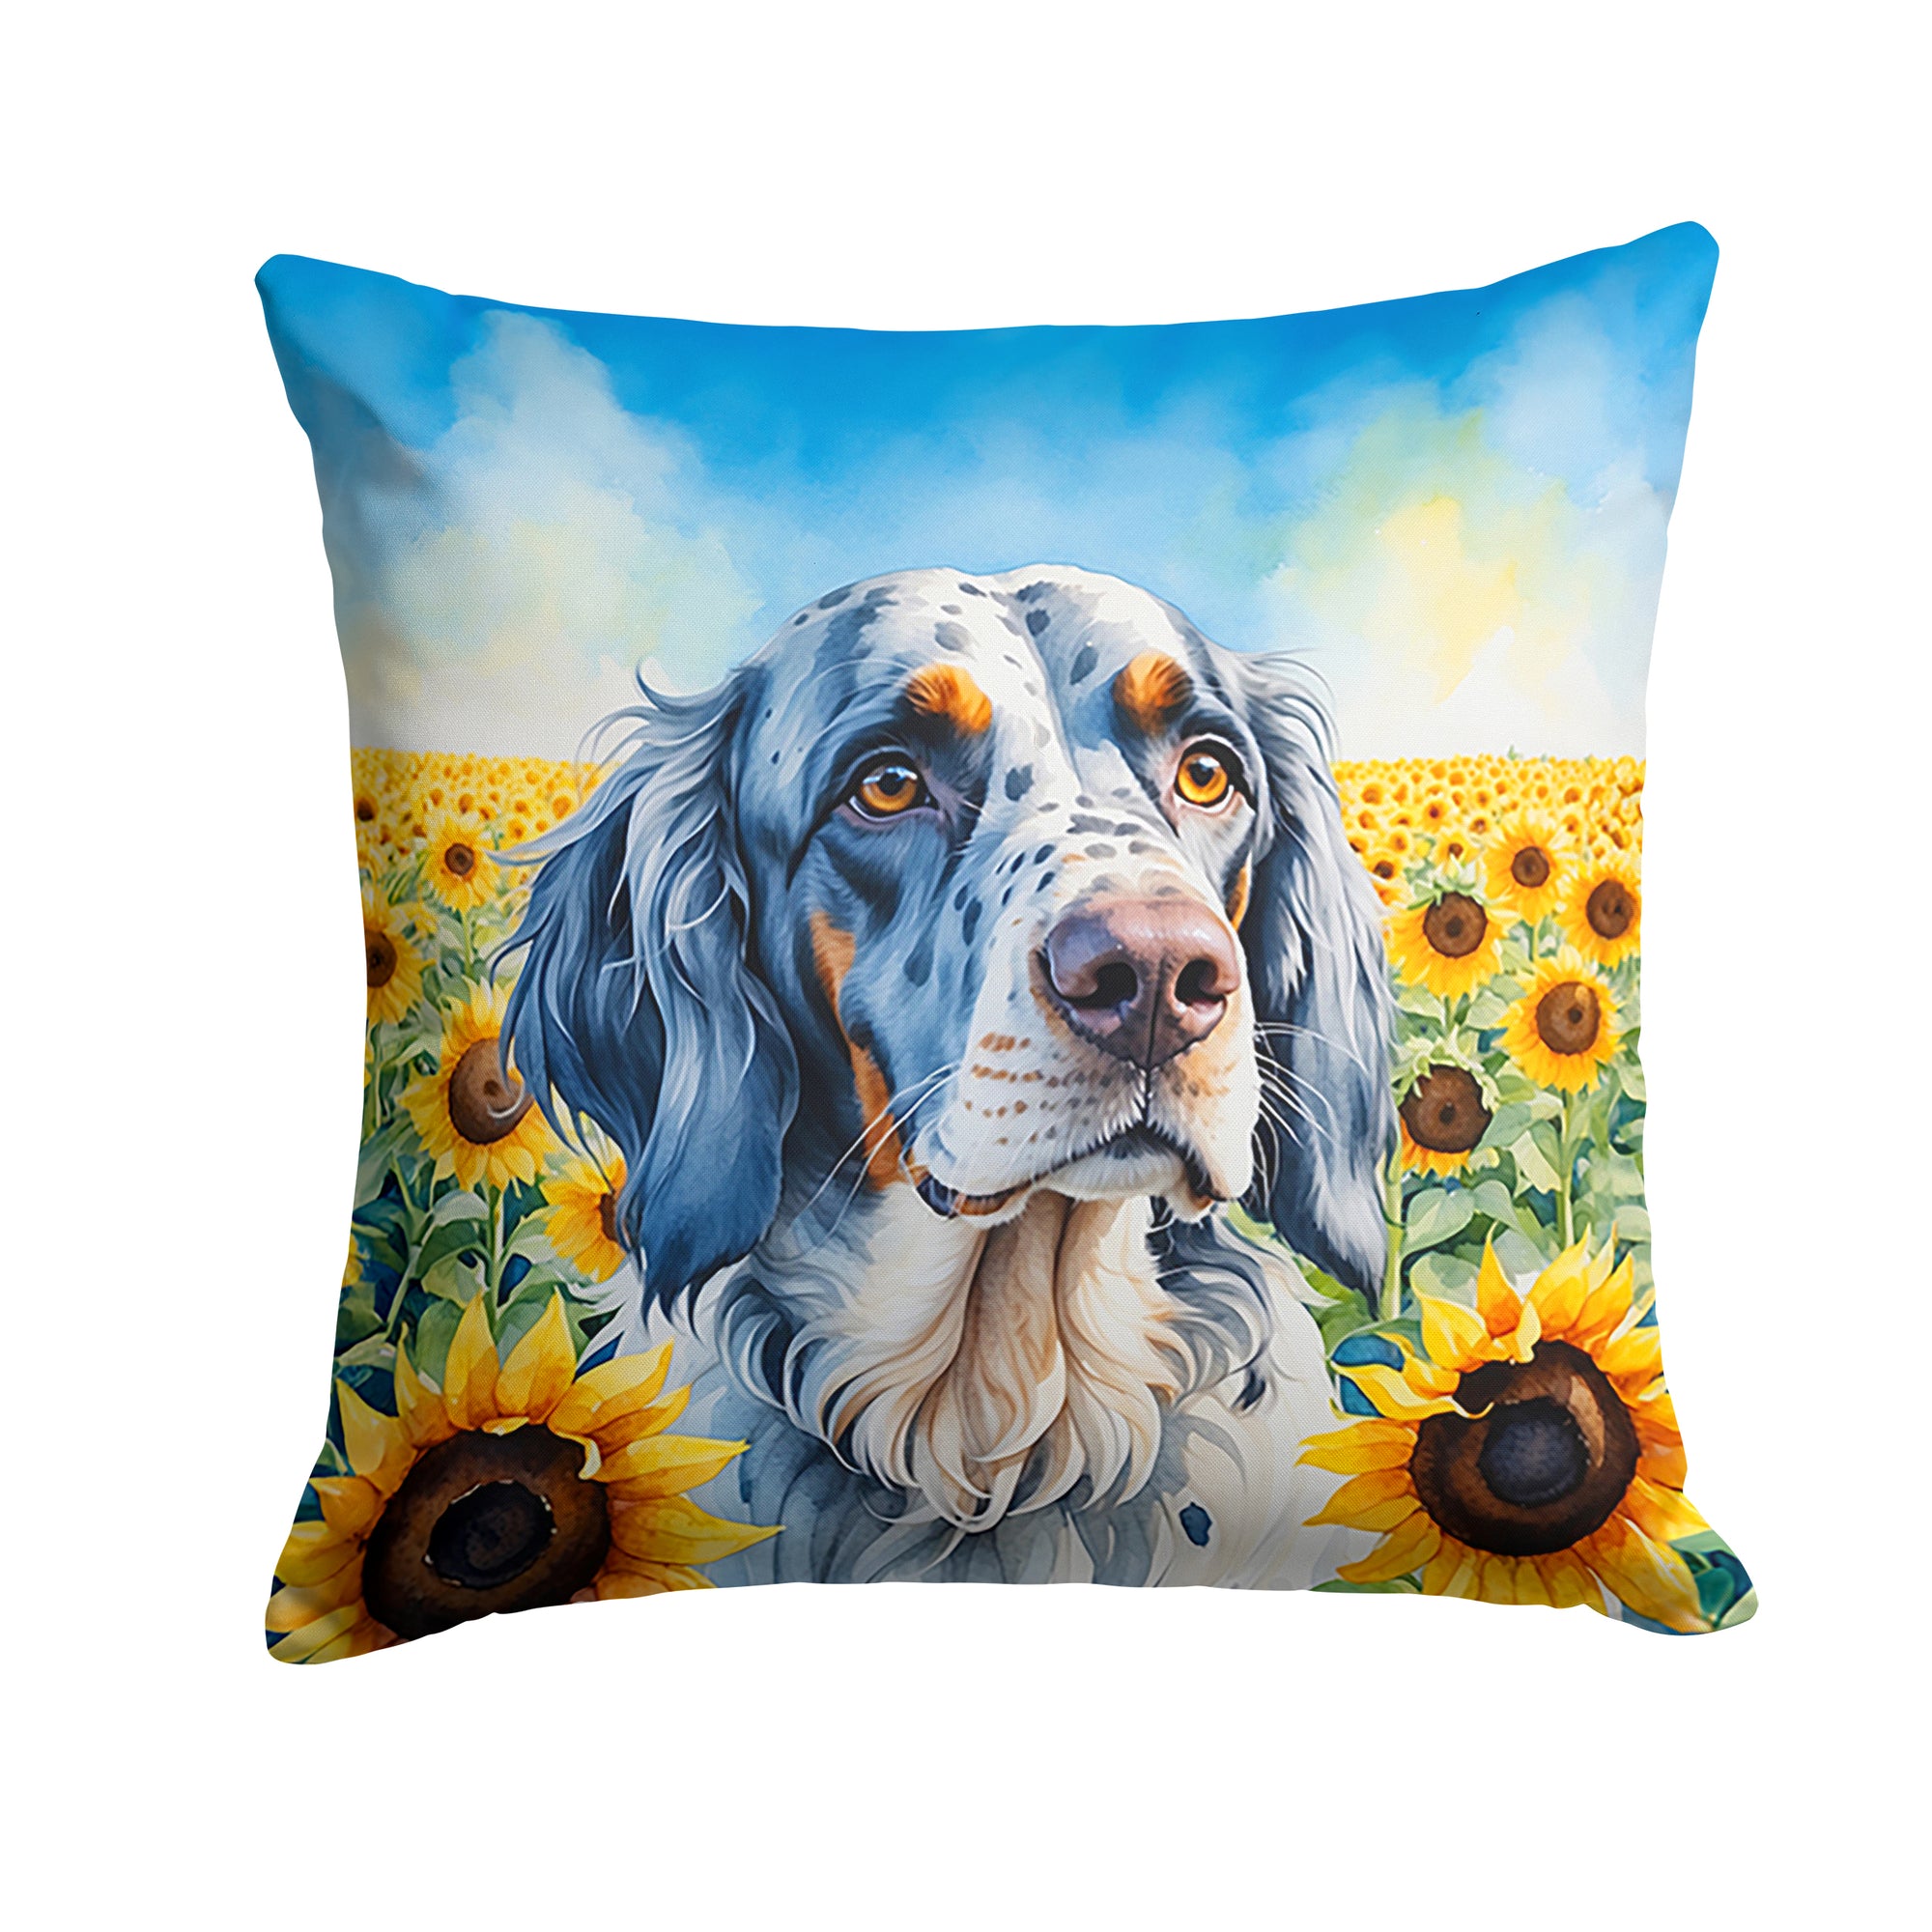 Buy this English Setter in Sunflowers Throw Pillow